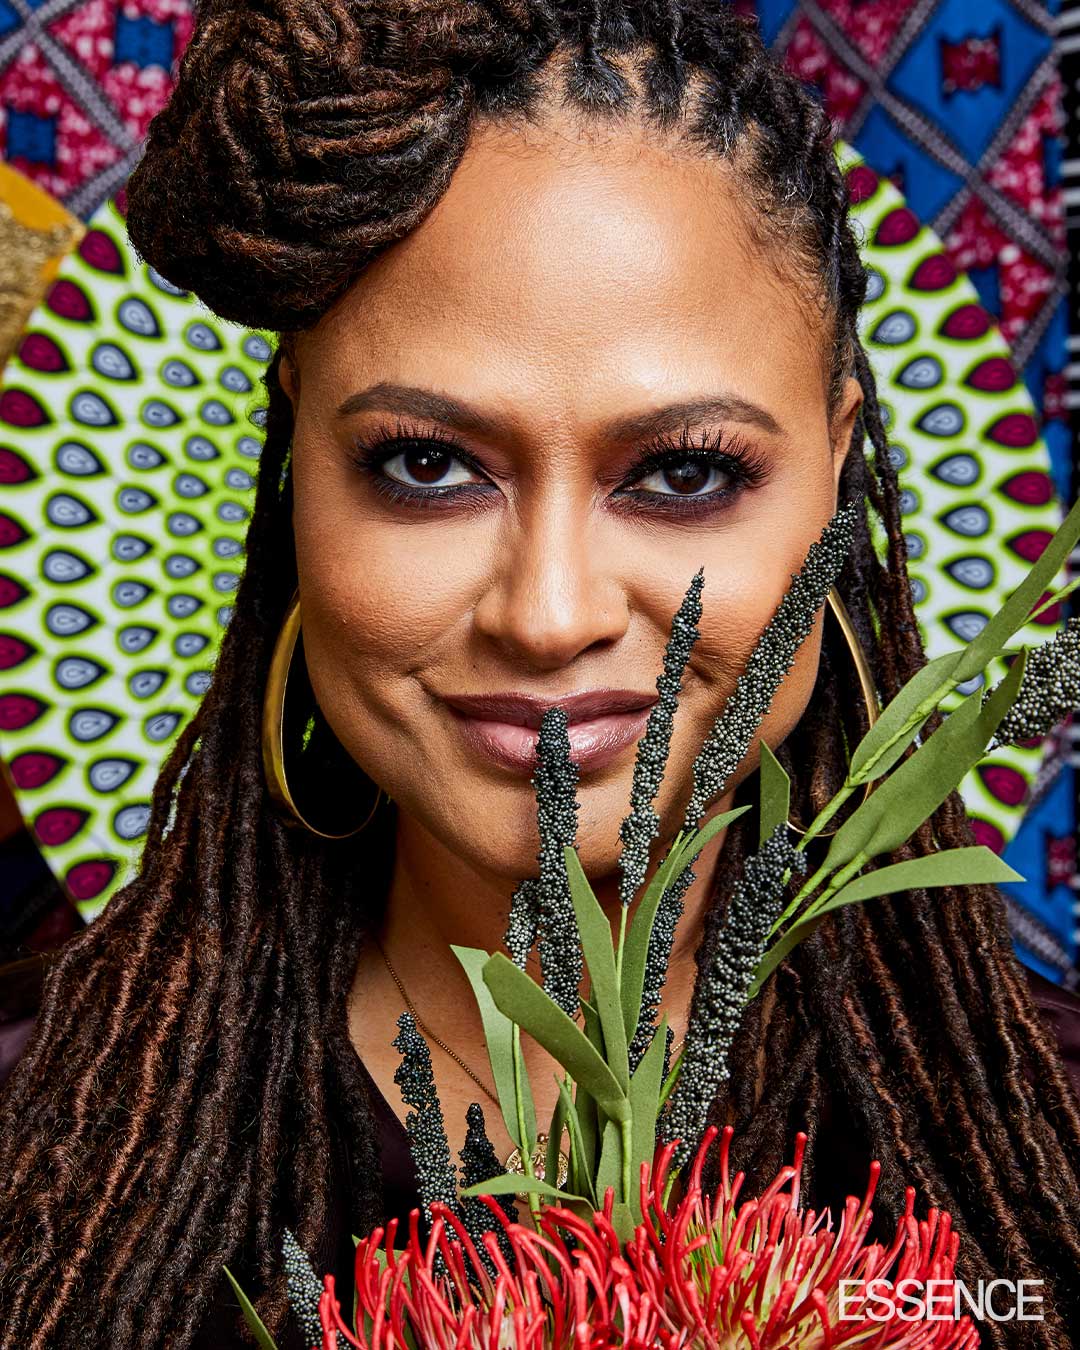 Ava DuVernay's Array 360 Film Series Promotes The Power Of Black Women’s Perspectives